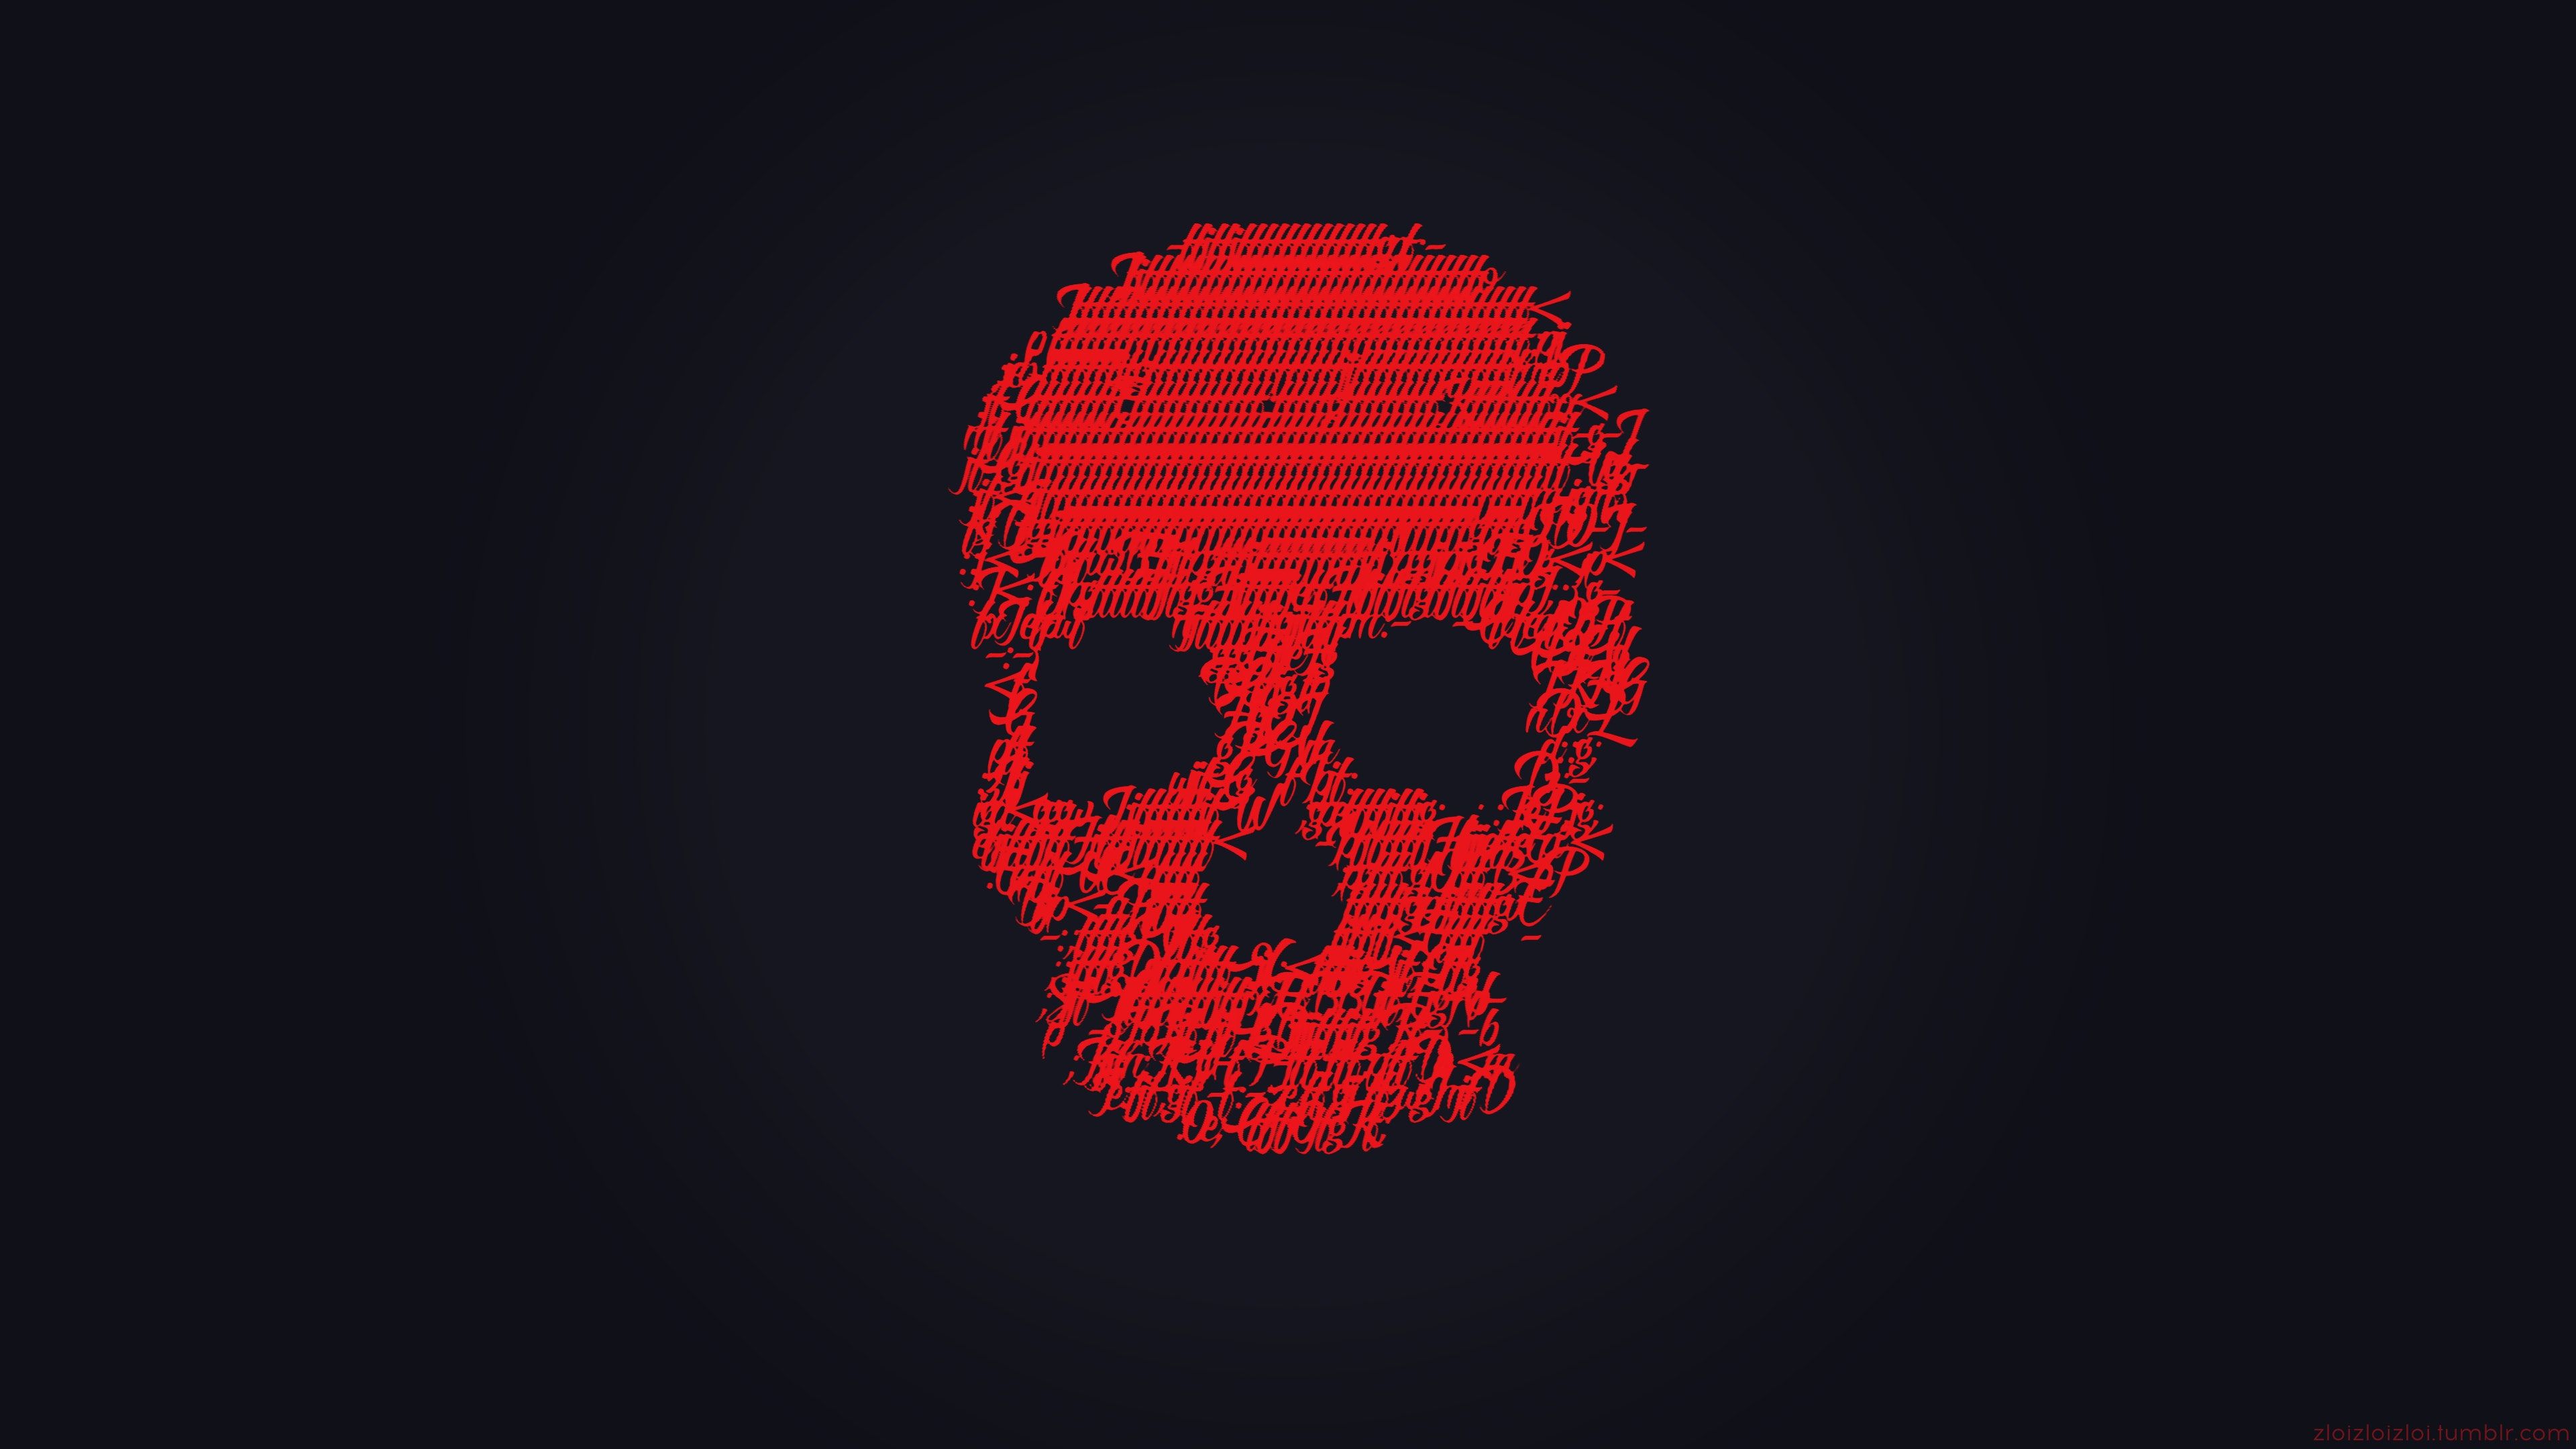 Skull1 4K wallpaper for your desktop or mobile screen free and easy to download